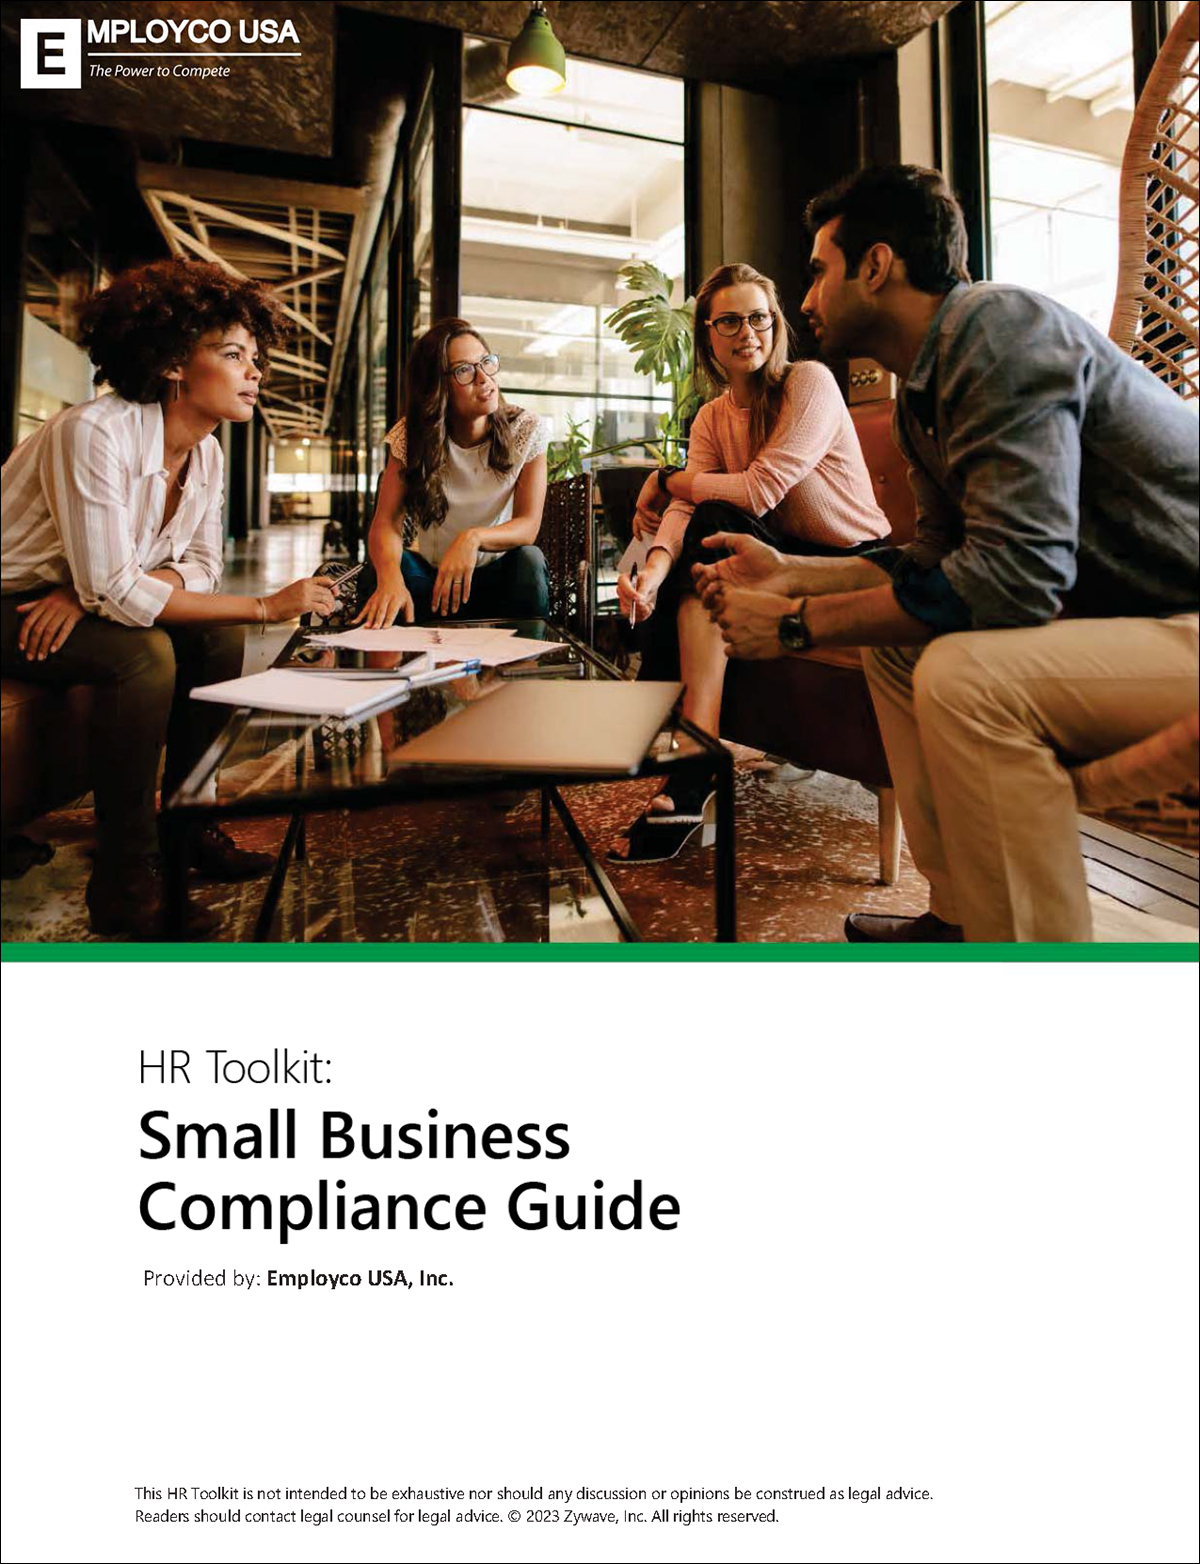 HR Toolkit – Small Business Compliance Guide